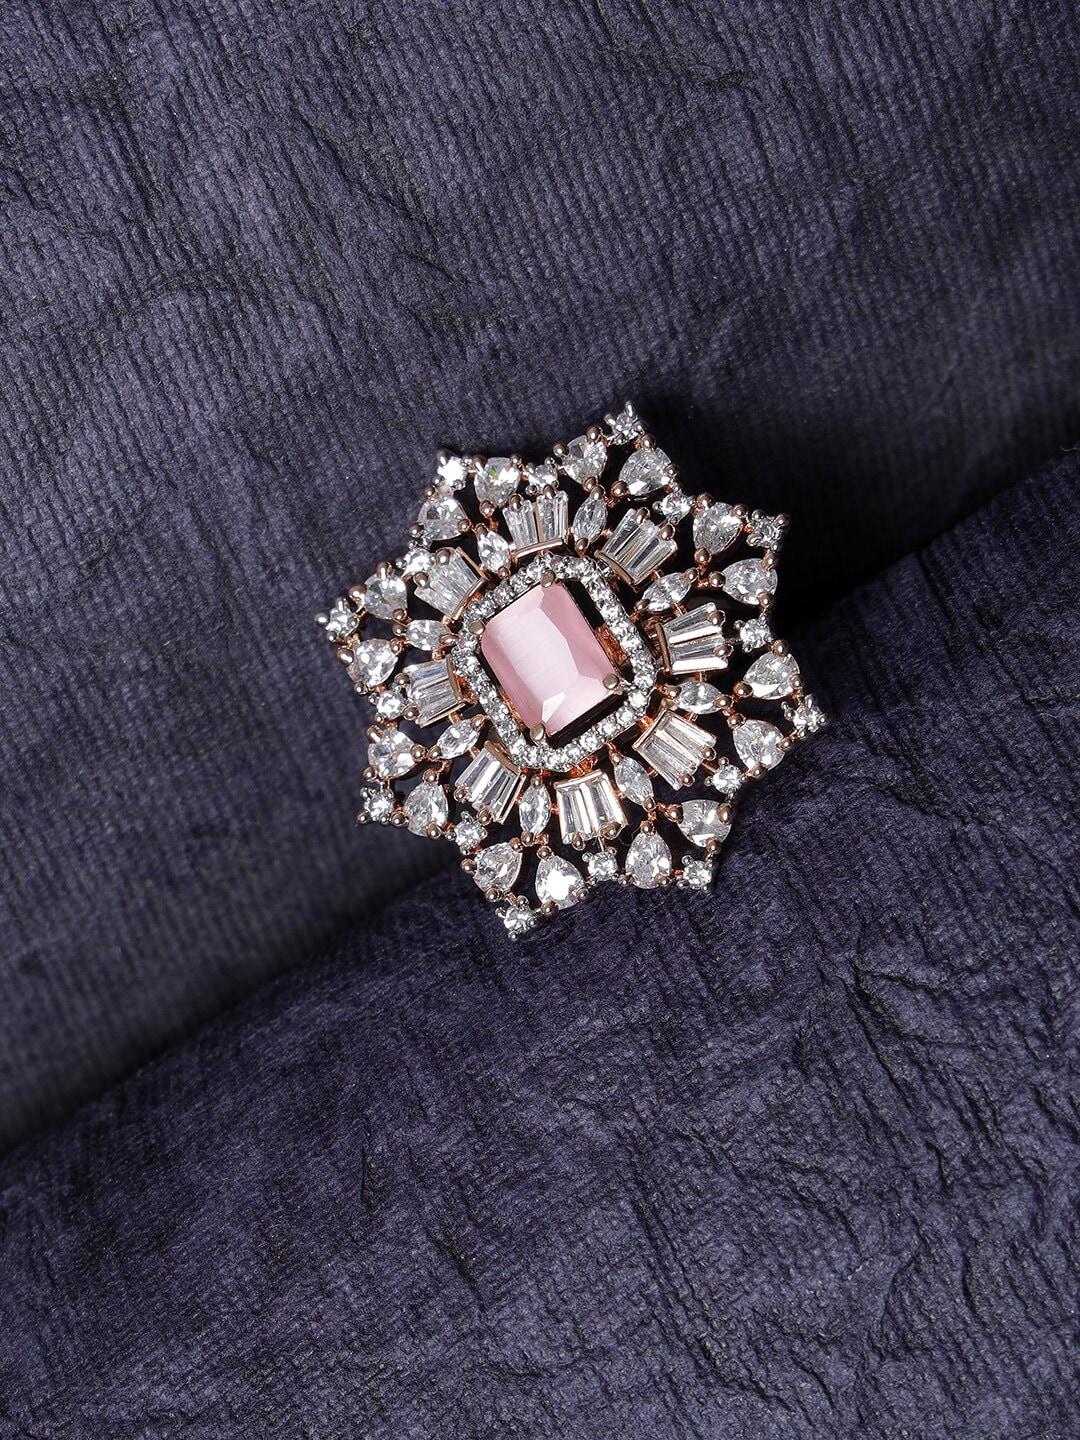 jazz and sizzle rose gold-plated white & pink ad stone studded ring